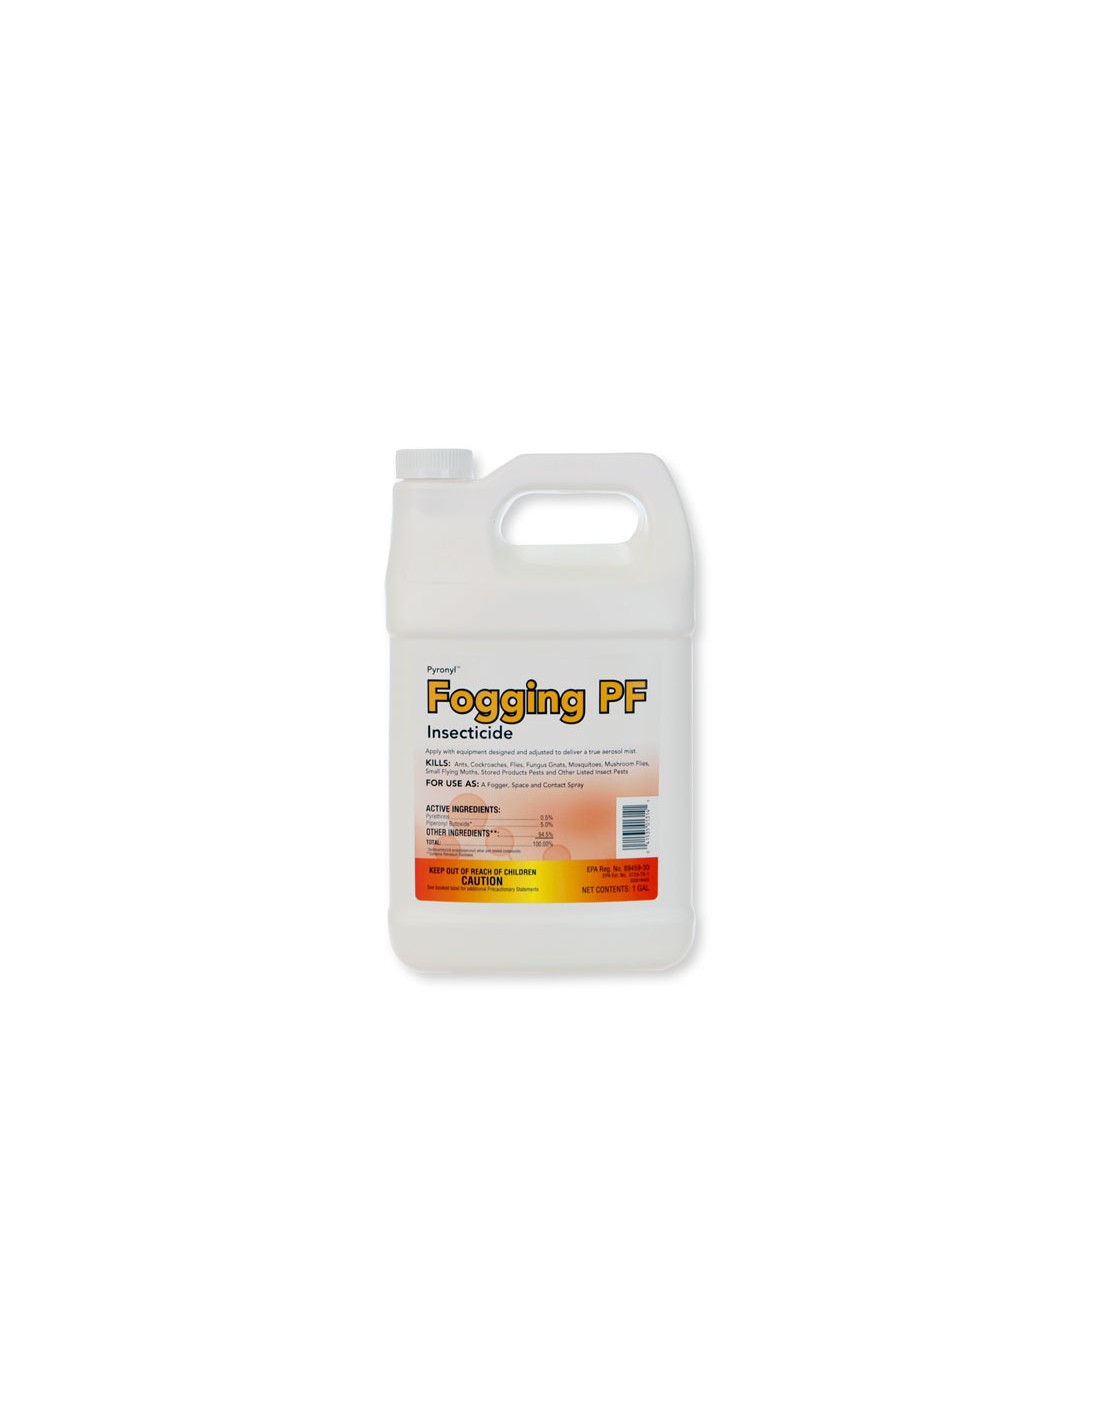 Can your fogging pff be used In a propane heated fogger?